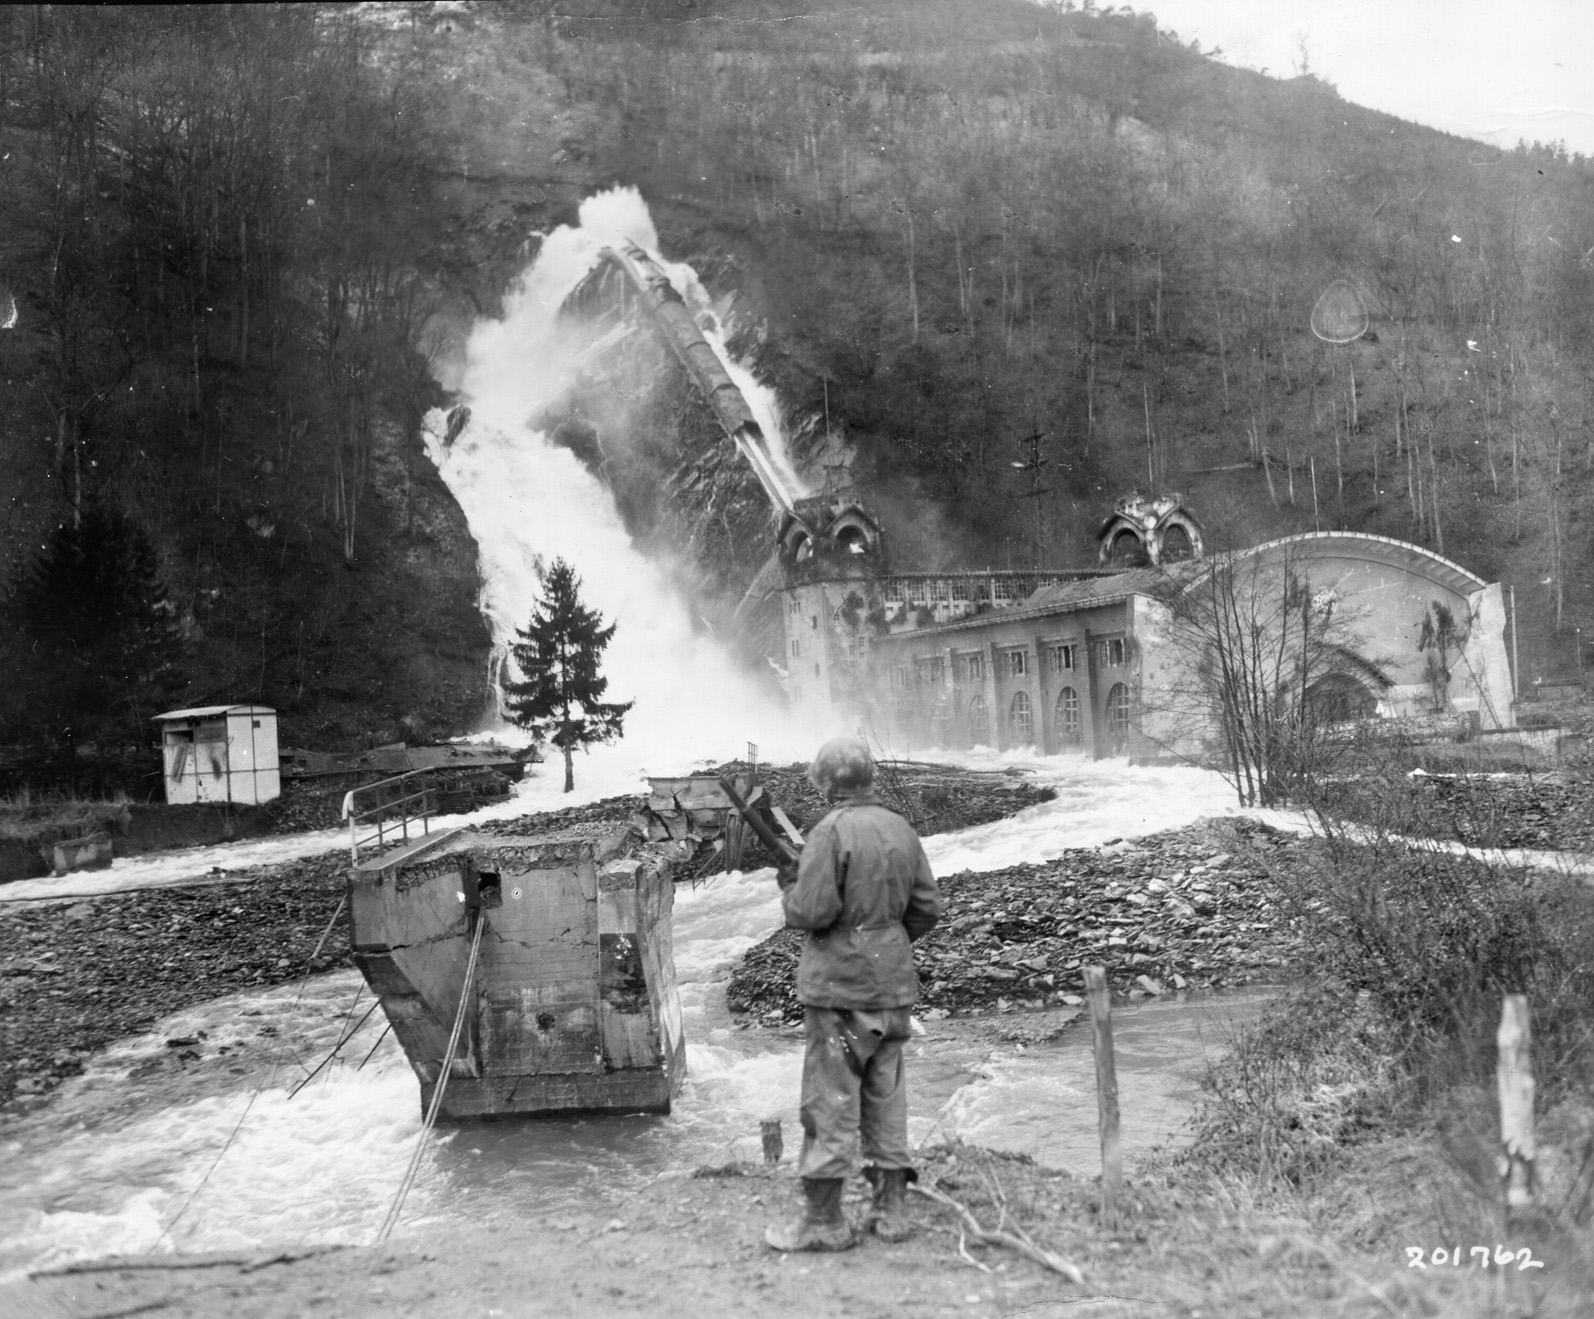 An American soldier watches torrents of water from the River Rur flow around the Heimbach hydro electric plant after the Schwammenauel Dam was breached in February 1945.